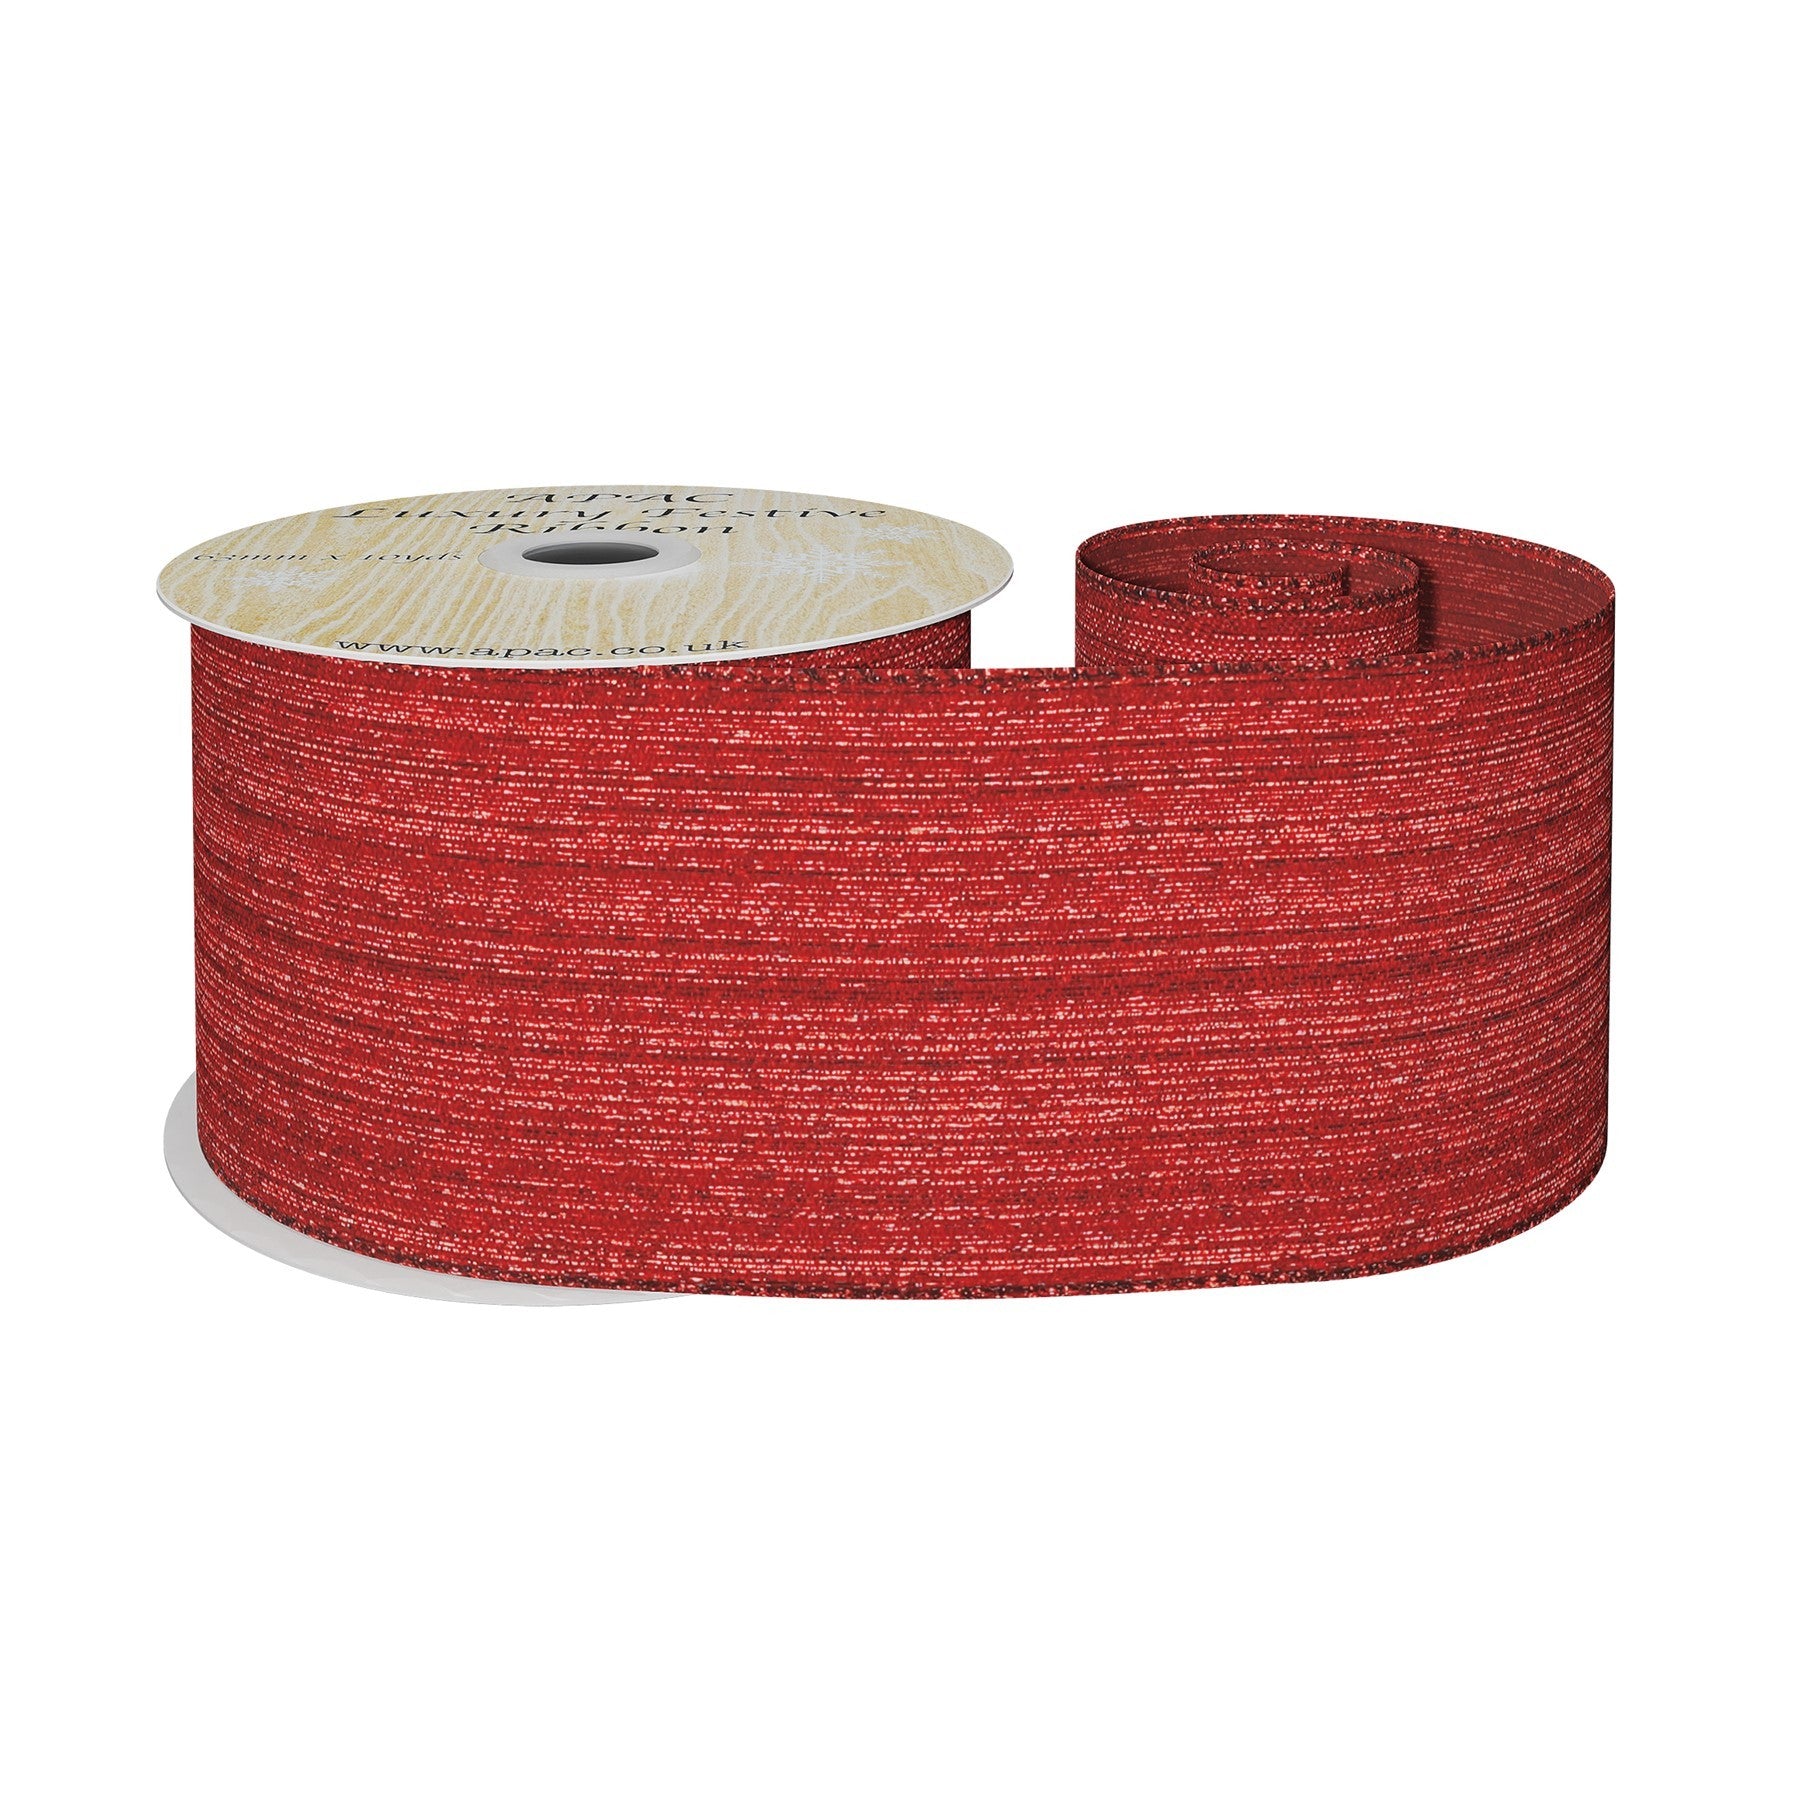 View Red Shimmer Thread Ribbon 63mm x 10yds information